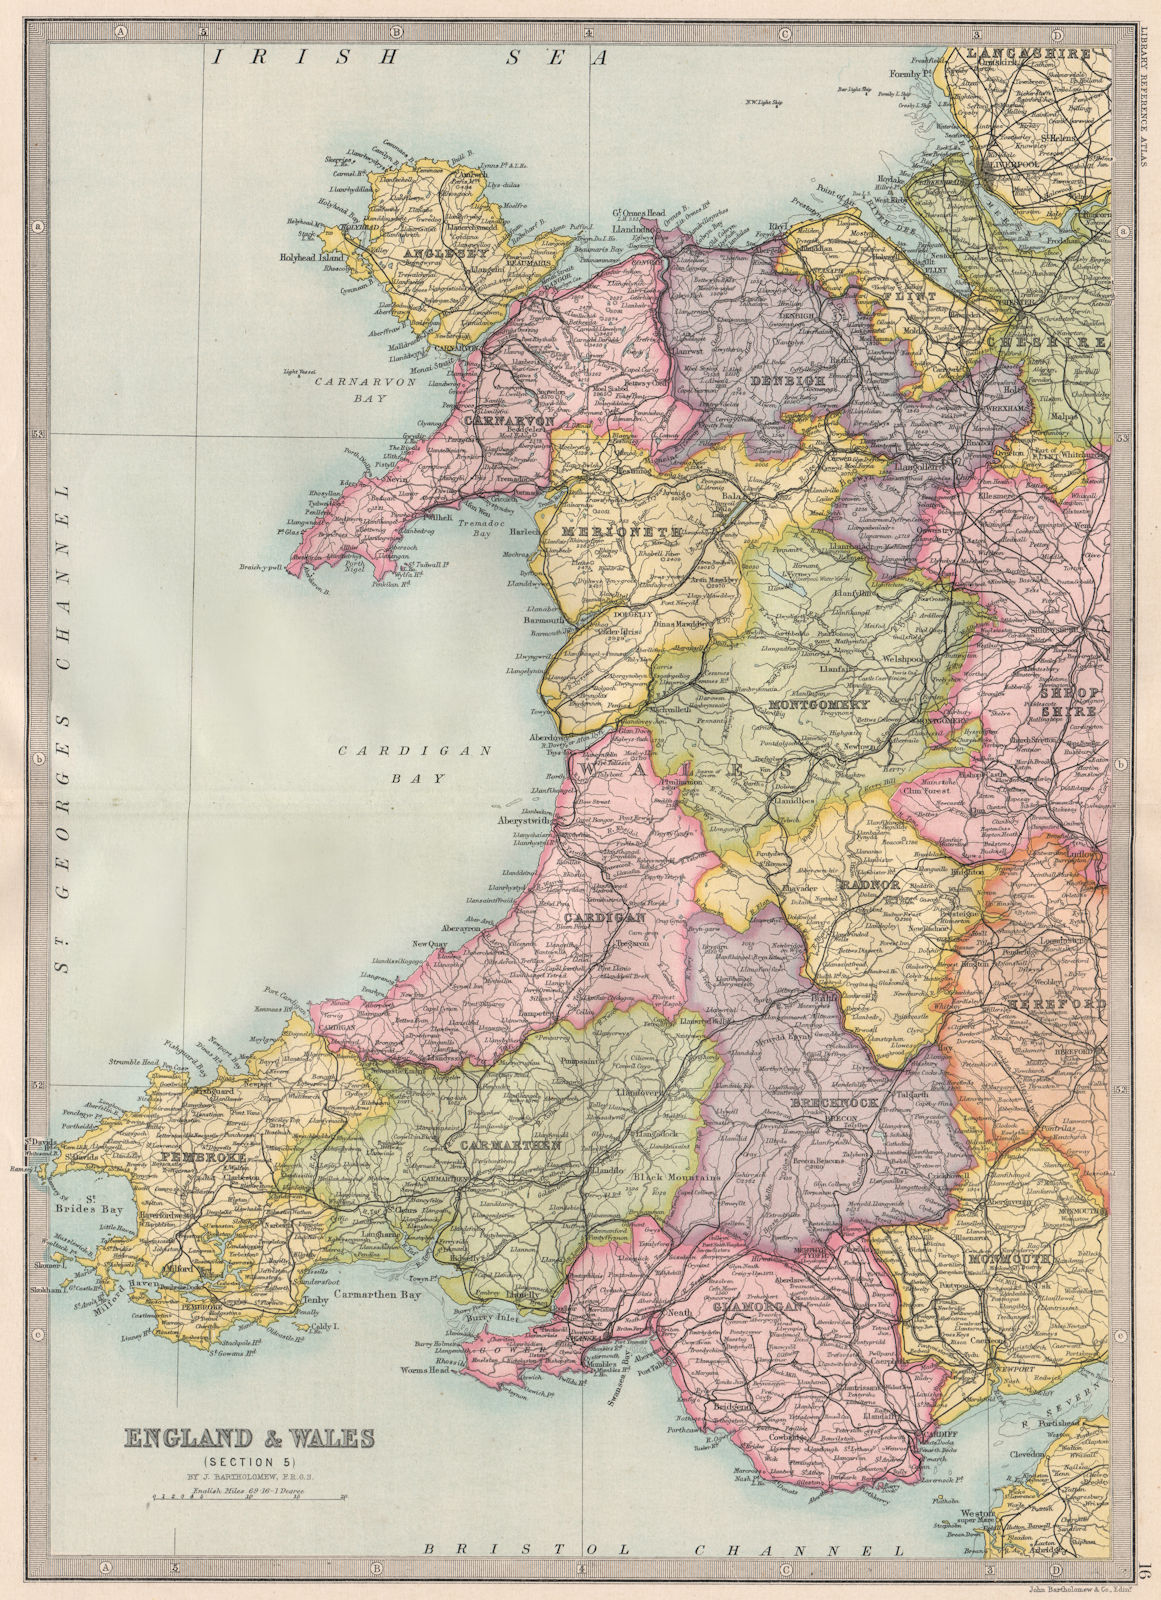 Associate Product WALES. Showing counties. Railways. BARTHOLOMEW 1890 old antique map plan chart